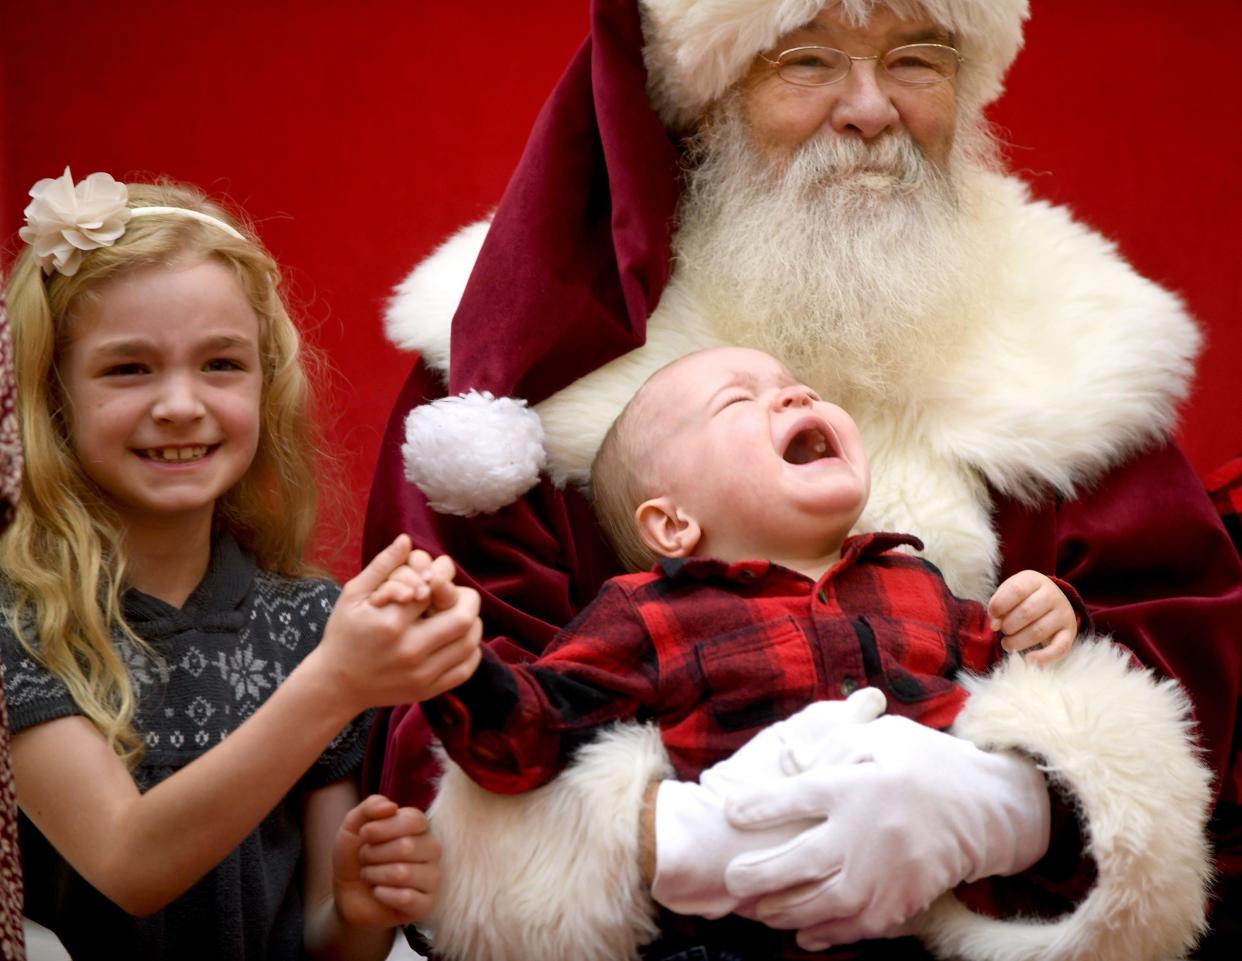 Lucy Wineka, 7, of North Canton does her best to reassure her cousin, Chance Koteles, 1, of North Canton during a visit to see Santa, who got an assist from Bernie Roberts of Akron at the Belden Village Mall.